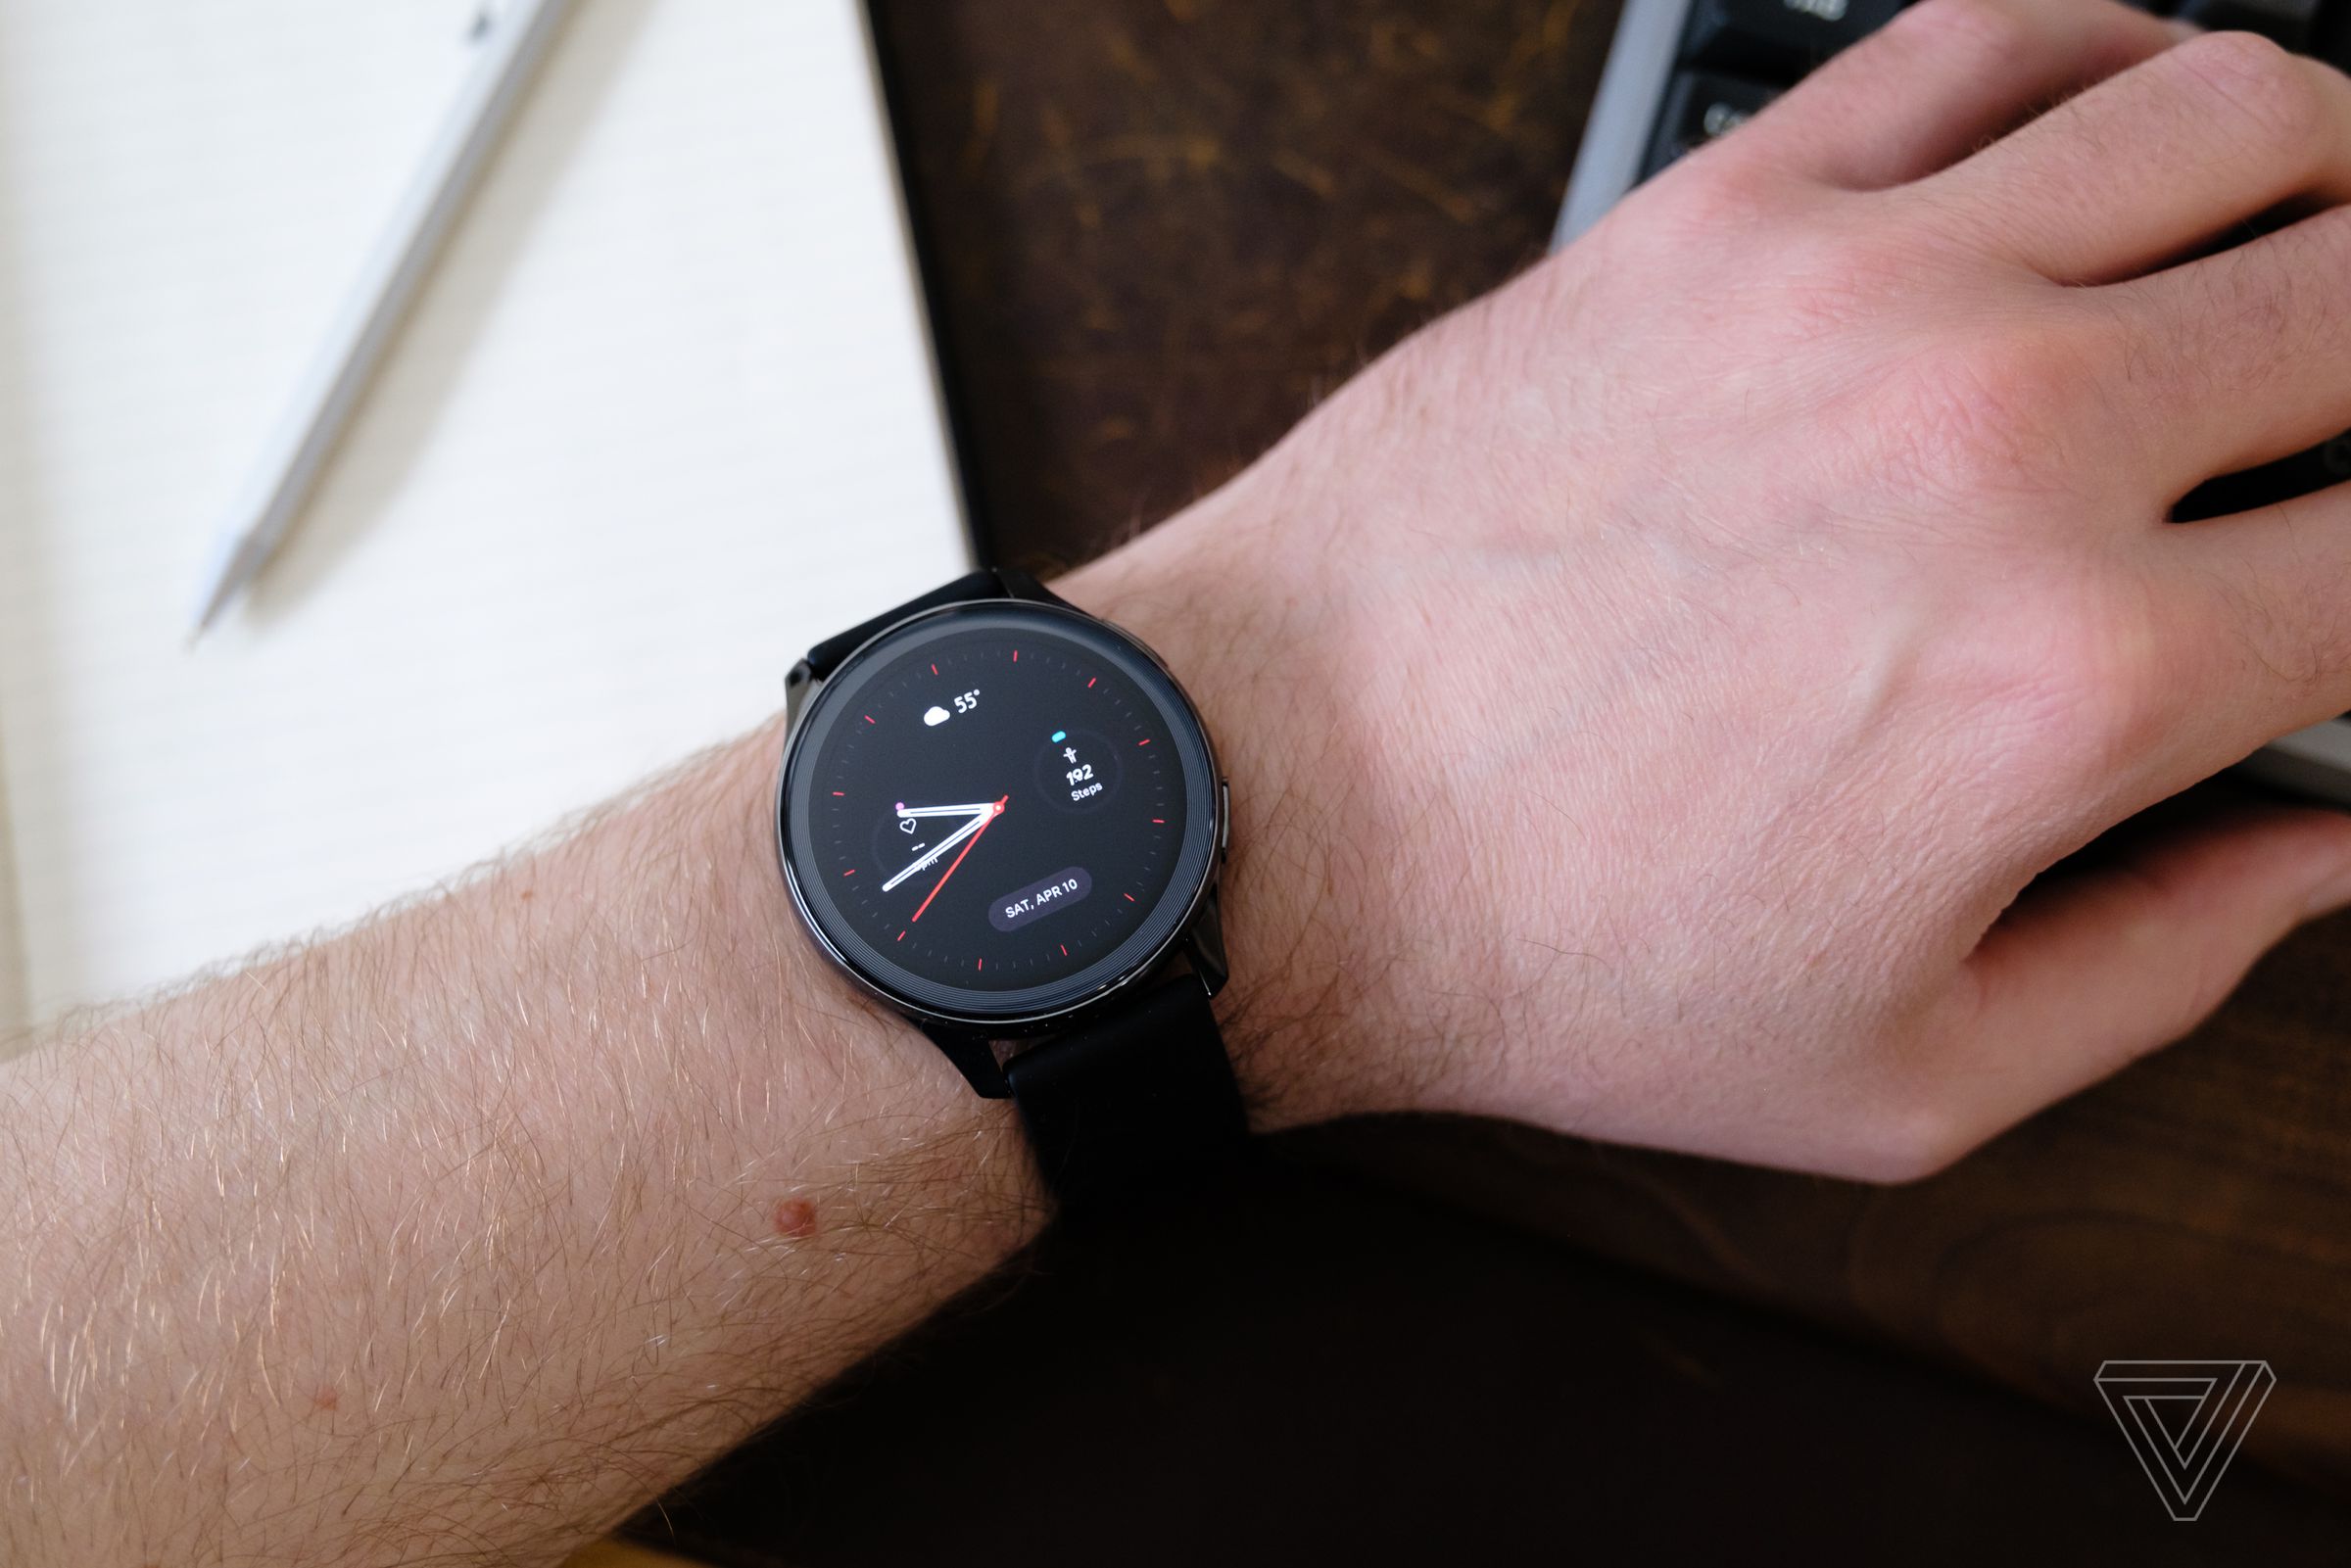 There are about 50 different watchfaces to choose from for the OnePlus Watch.